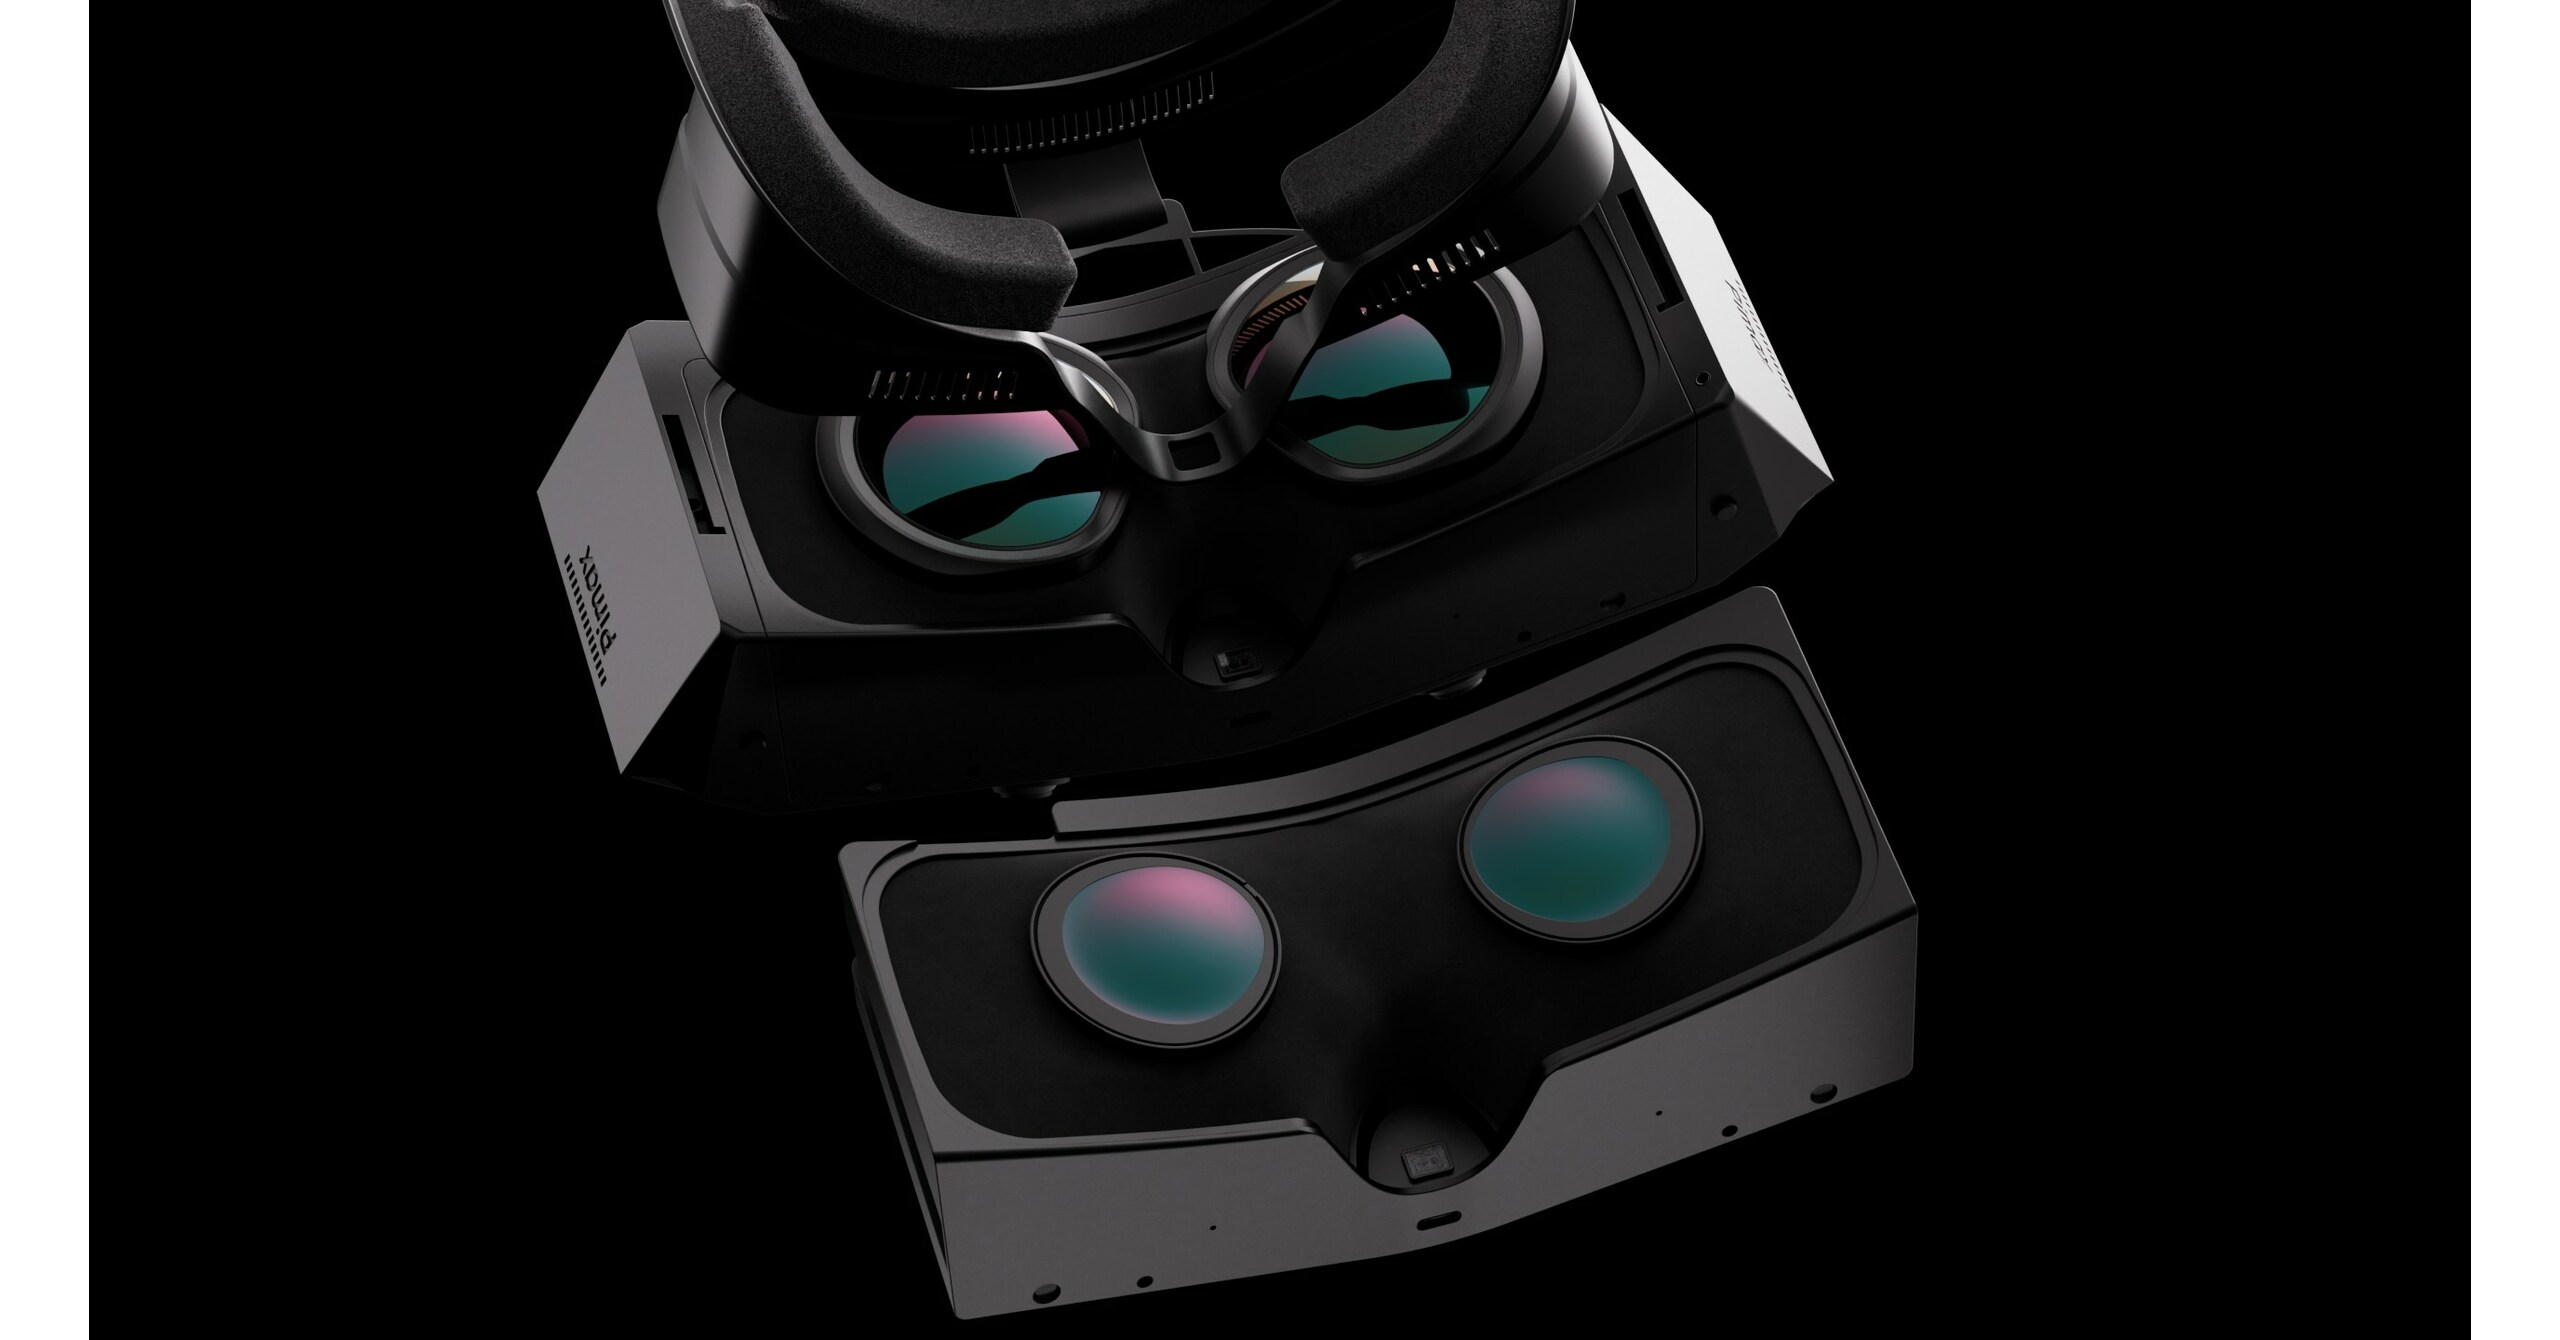 Pimax reveals two new high-end VR headsets at its Frontier event